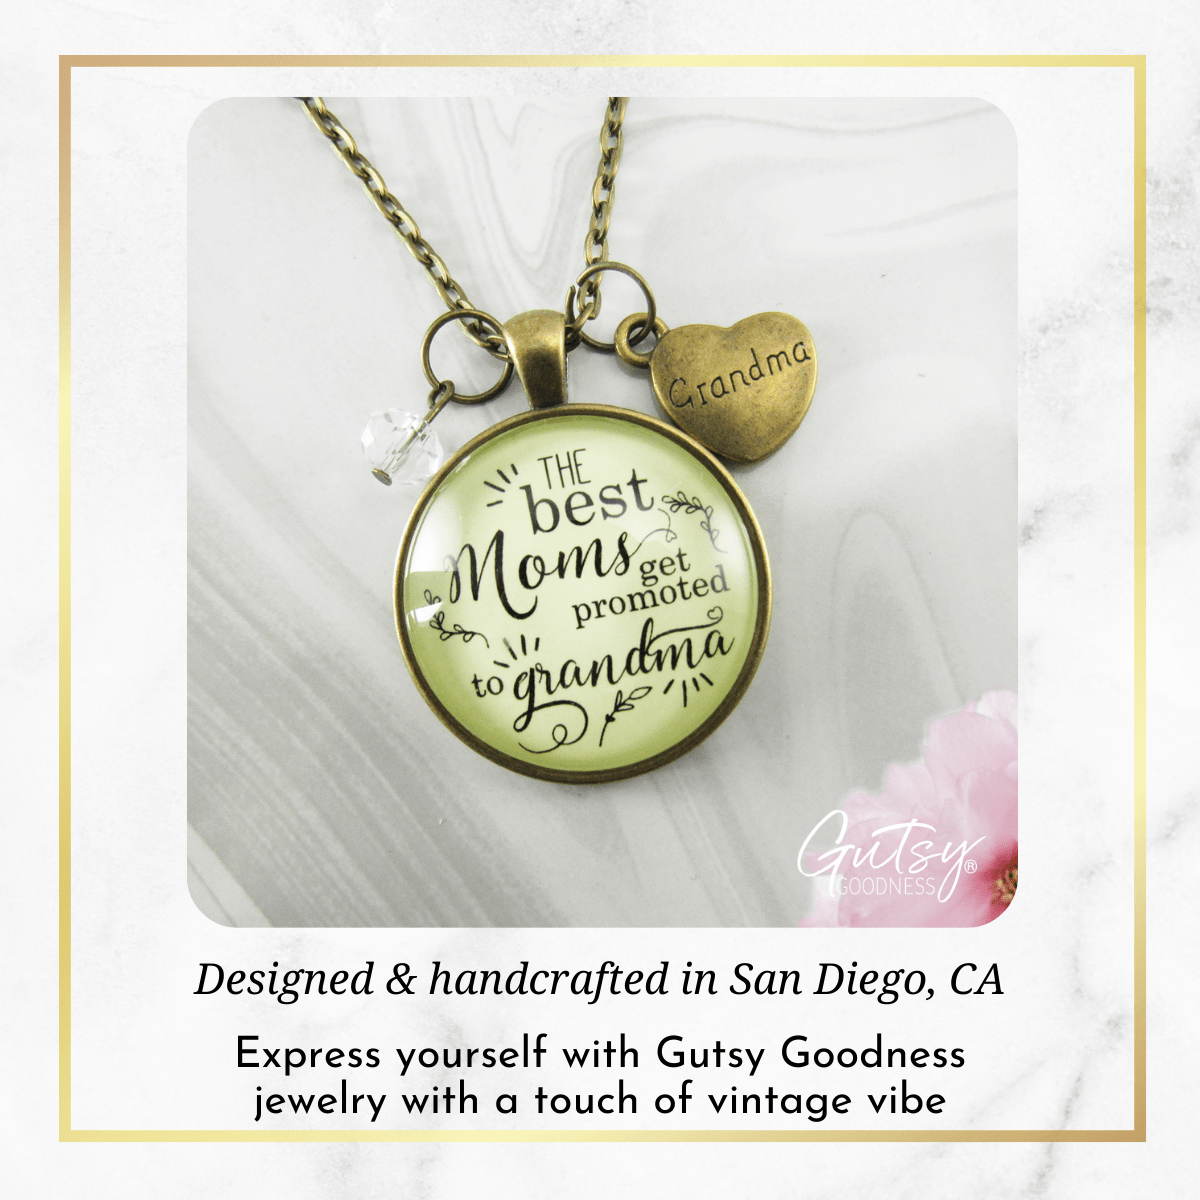 Gutsy Goodness Pregnancy Announcement Grandma Baby Reveal Necklace Best Mom Gift - Gutsy Goodness;Pregnancy Announcement Grandma Baby Reveal Necklace Best Mom Gift - Gutsy Goodness Handmade Jewelry Gifts